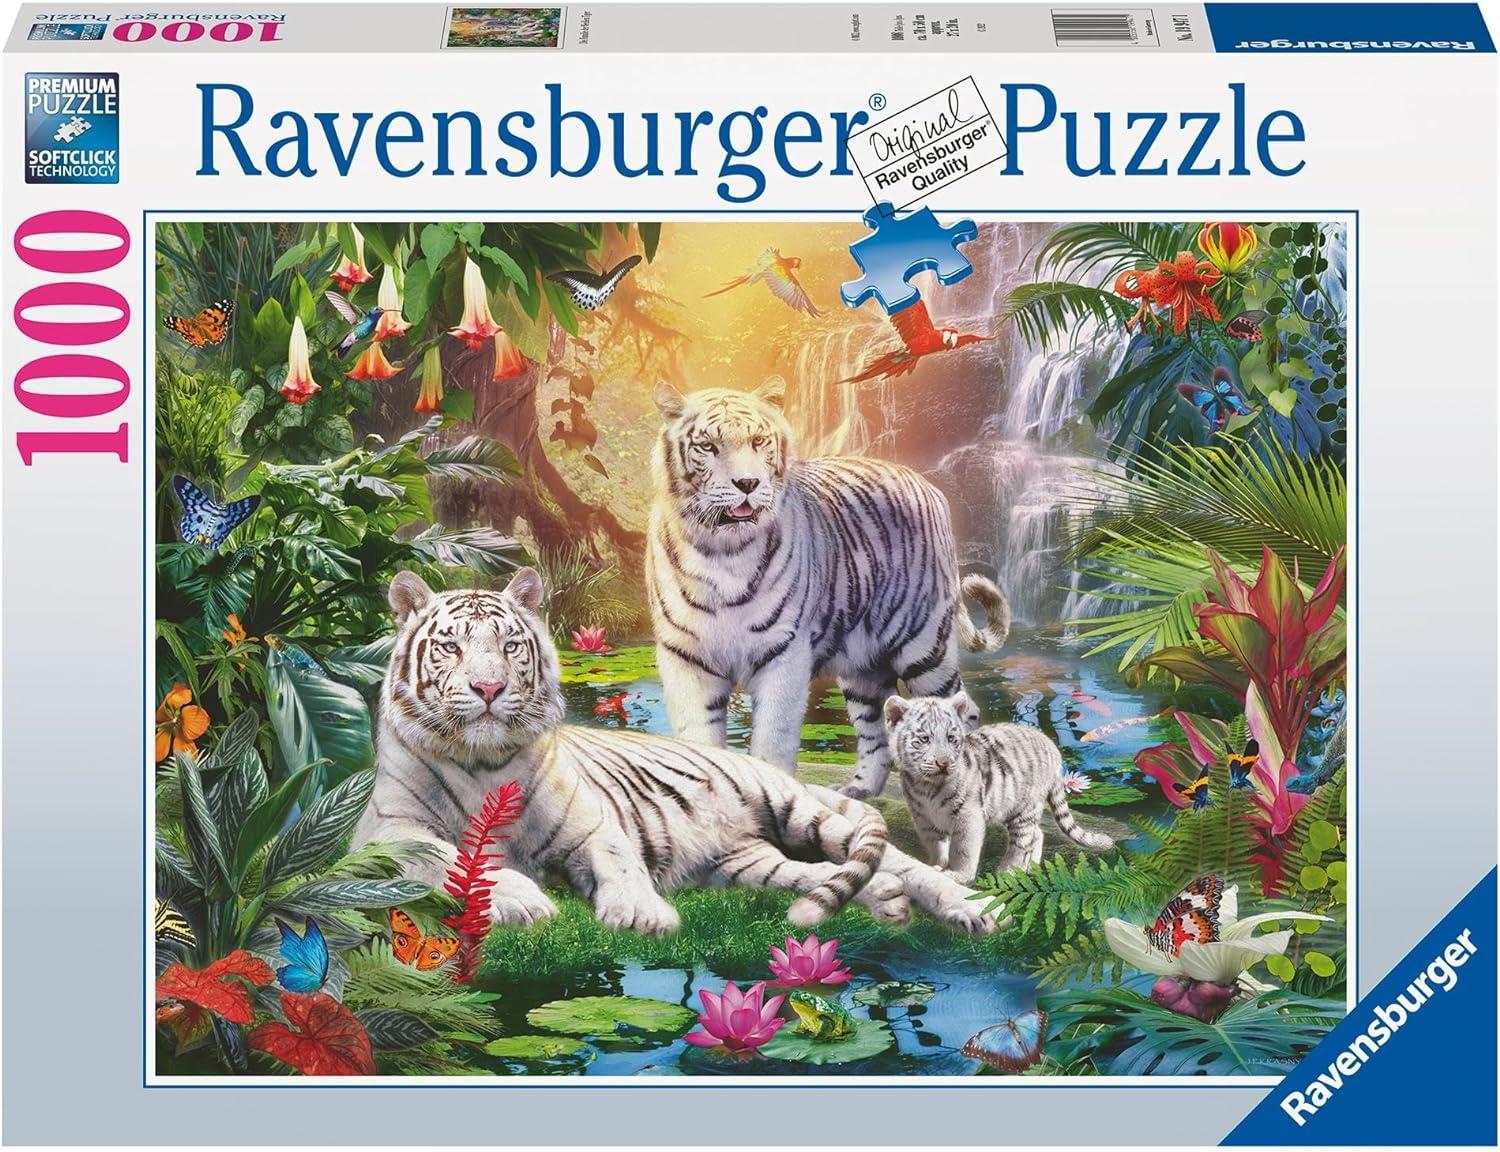 Ravensburger White Tiger Family Jigsaw Puzzle (1000 Pieces)